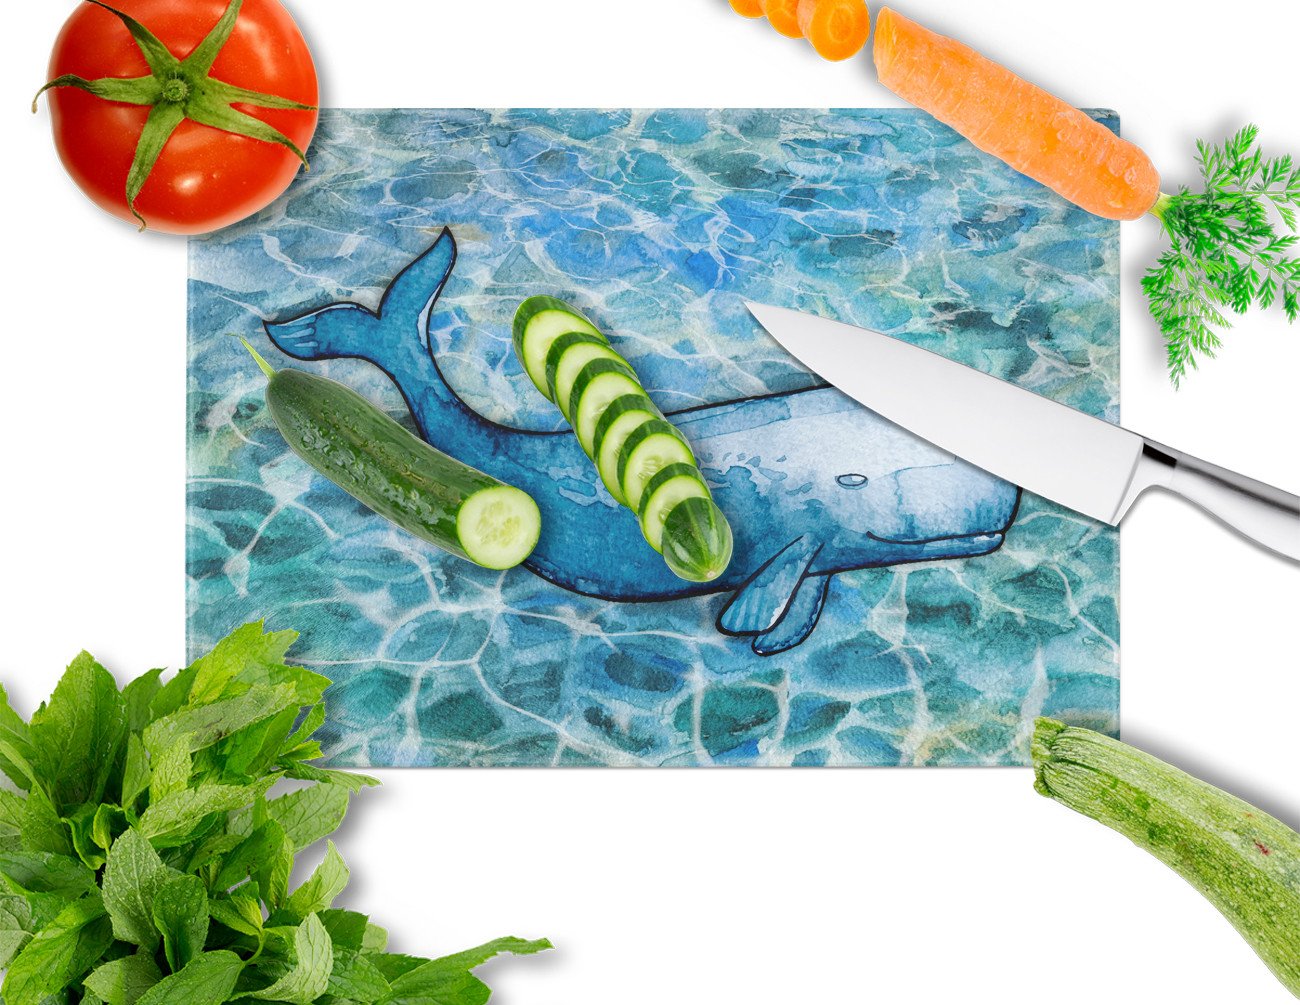 Sperm Whale Cachalot Glass Cutting Board Large BB5354LCB by Caroline's Treasures